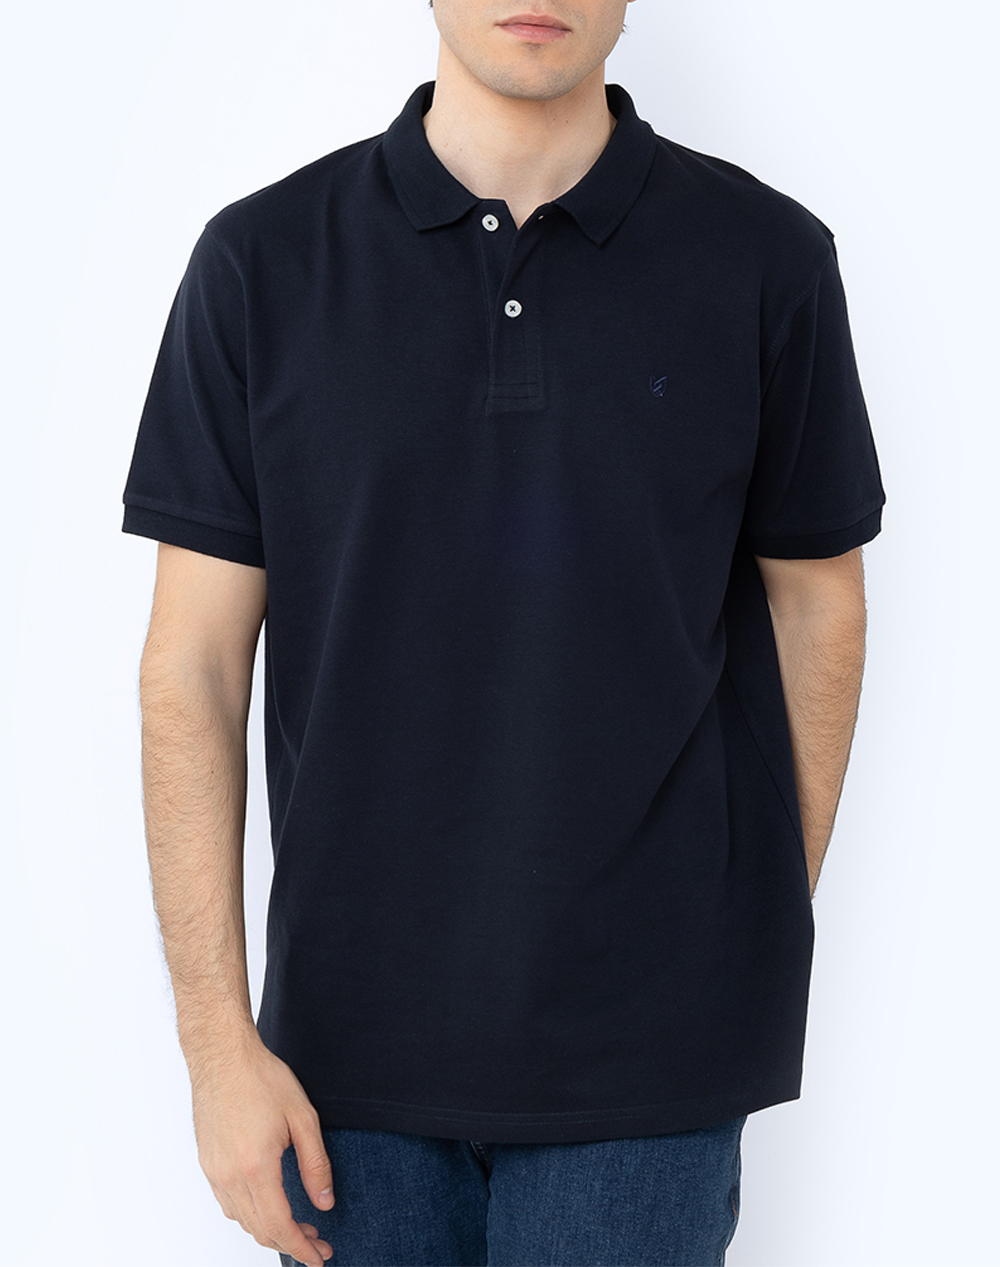 THE BOSTONIANS POLO PIQUE REGULAR FIT